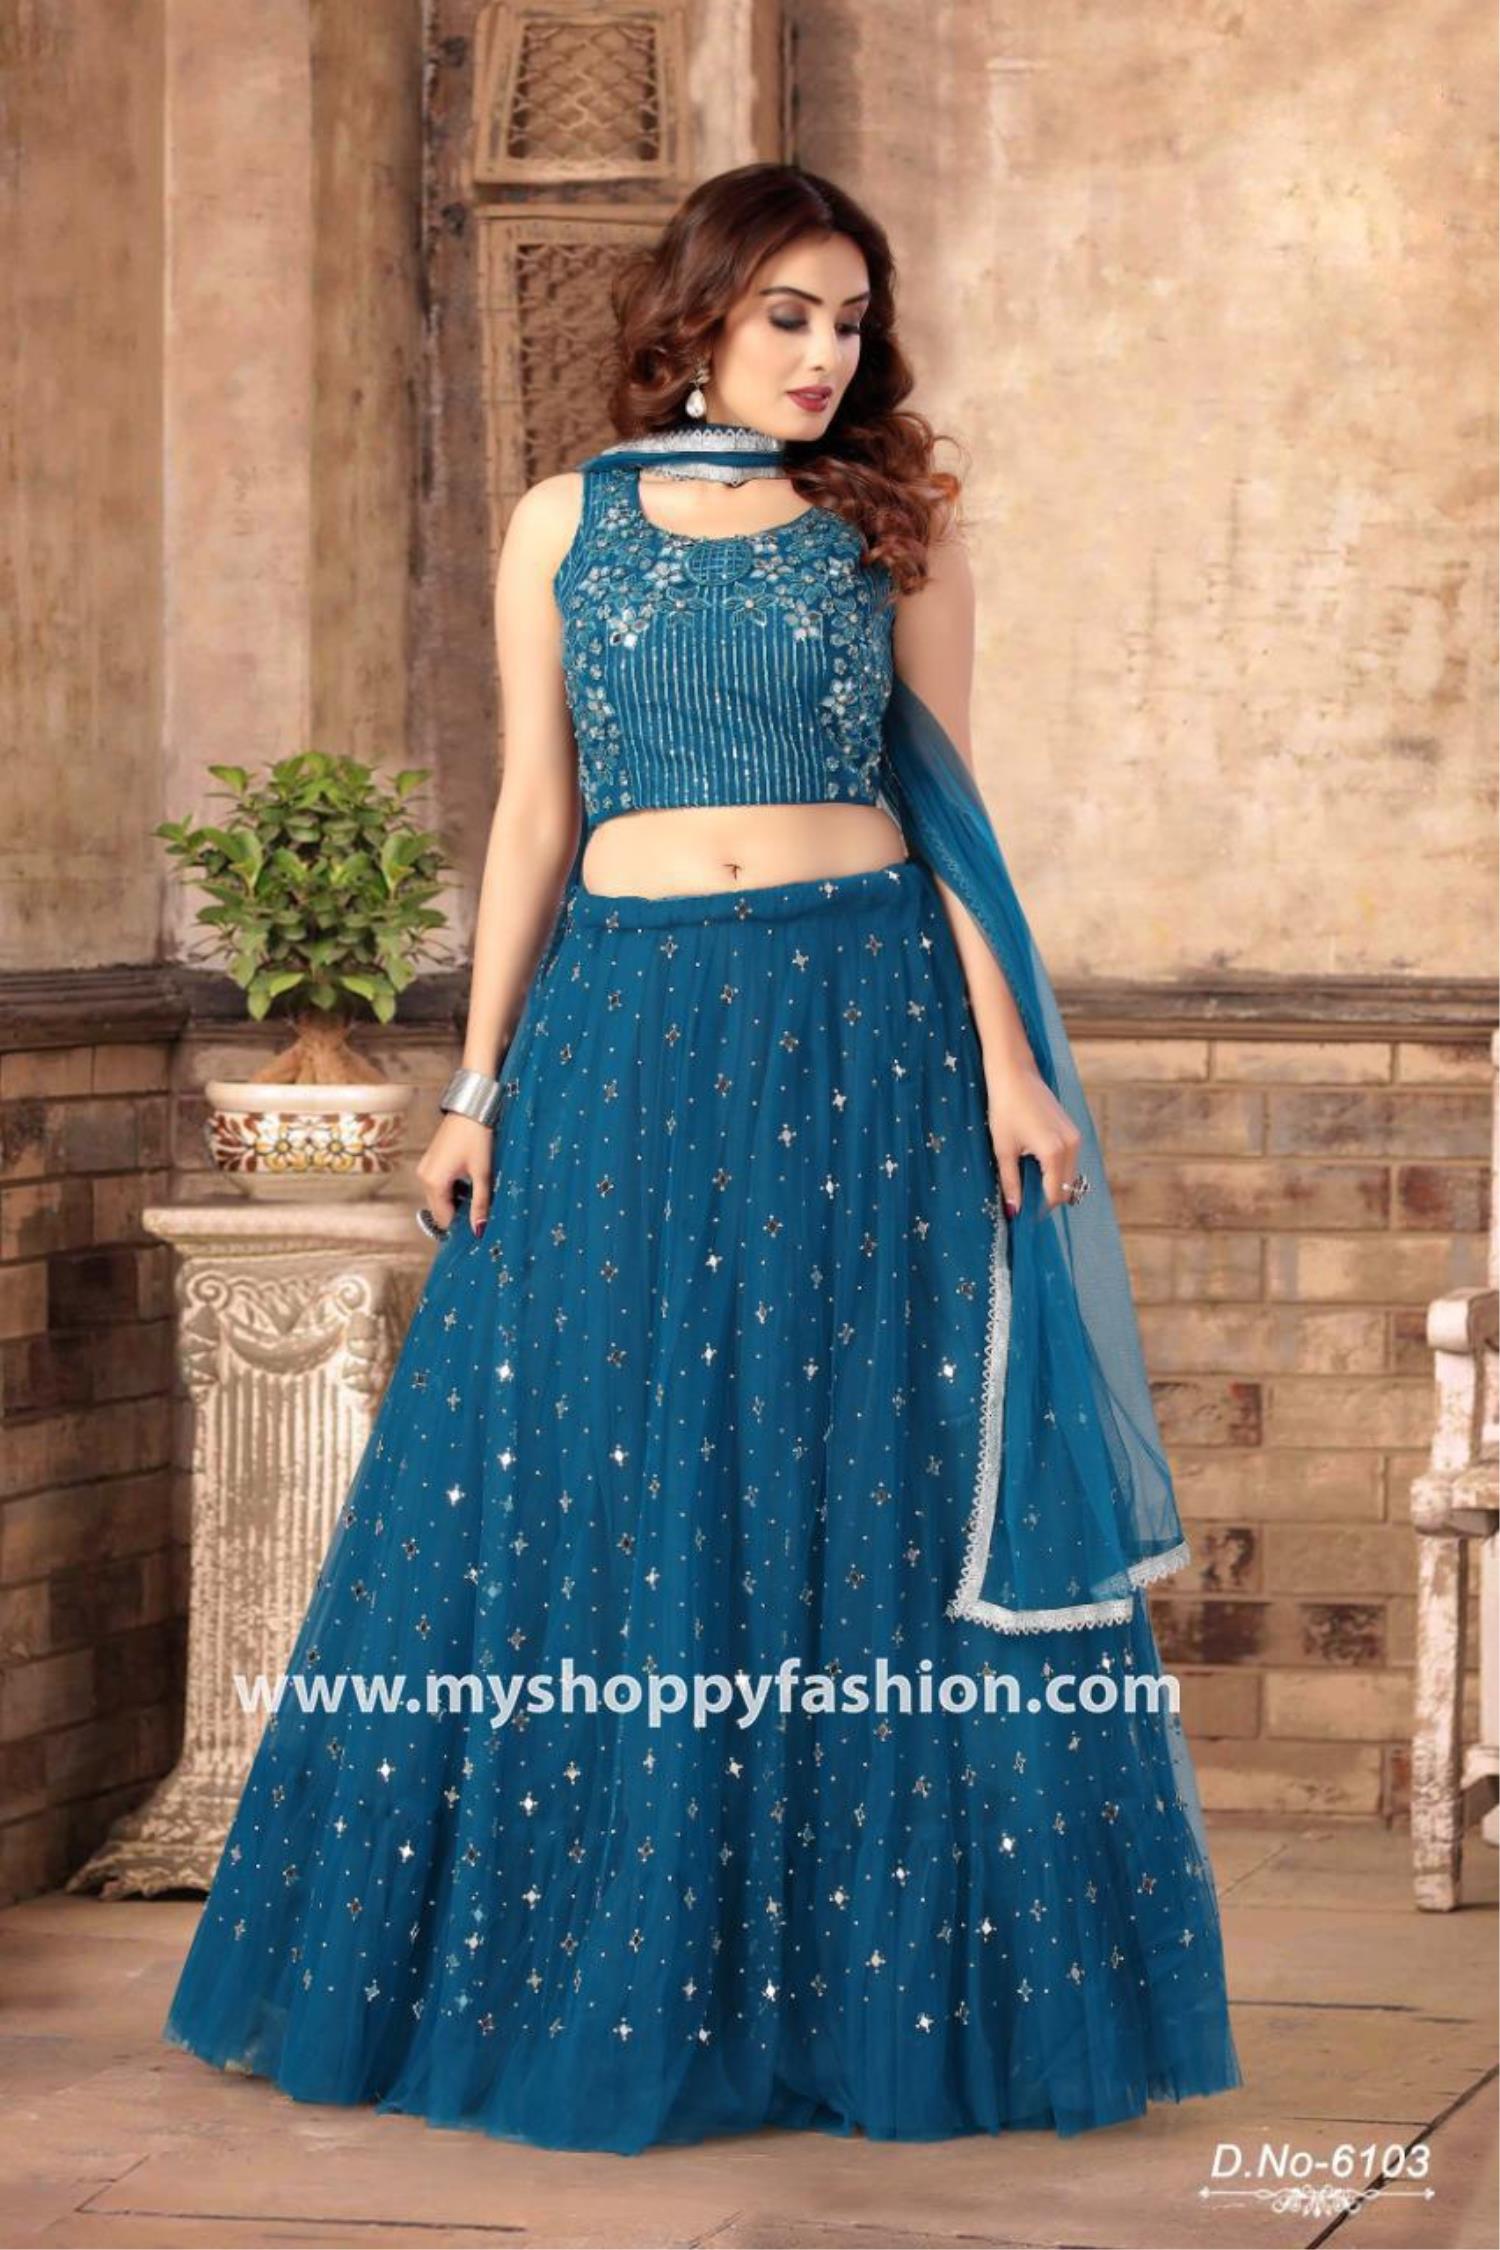 BLUE PARTYWEAR LEHENGA CHOLI at Rs.1599/Piece in surat offer by rms creation